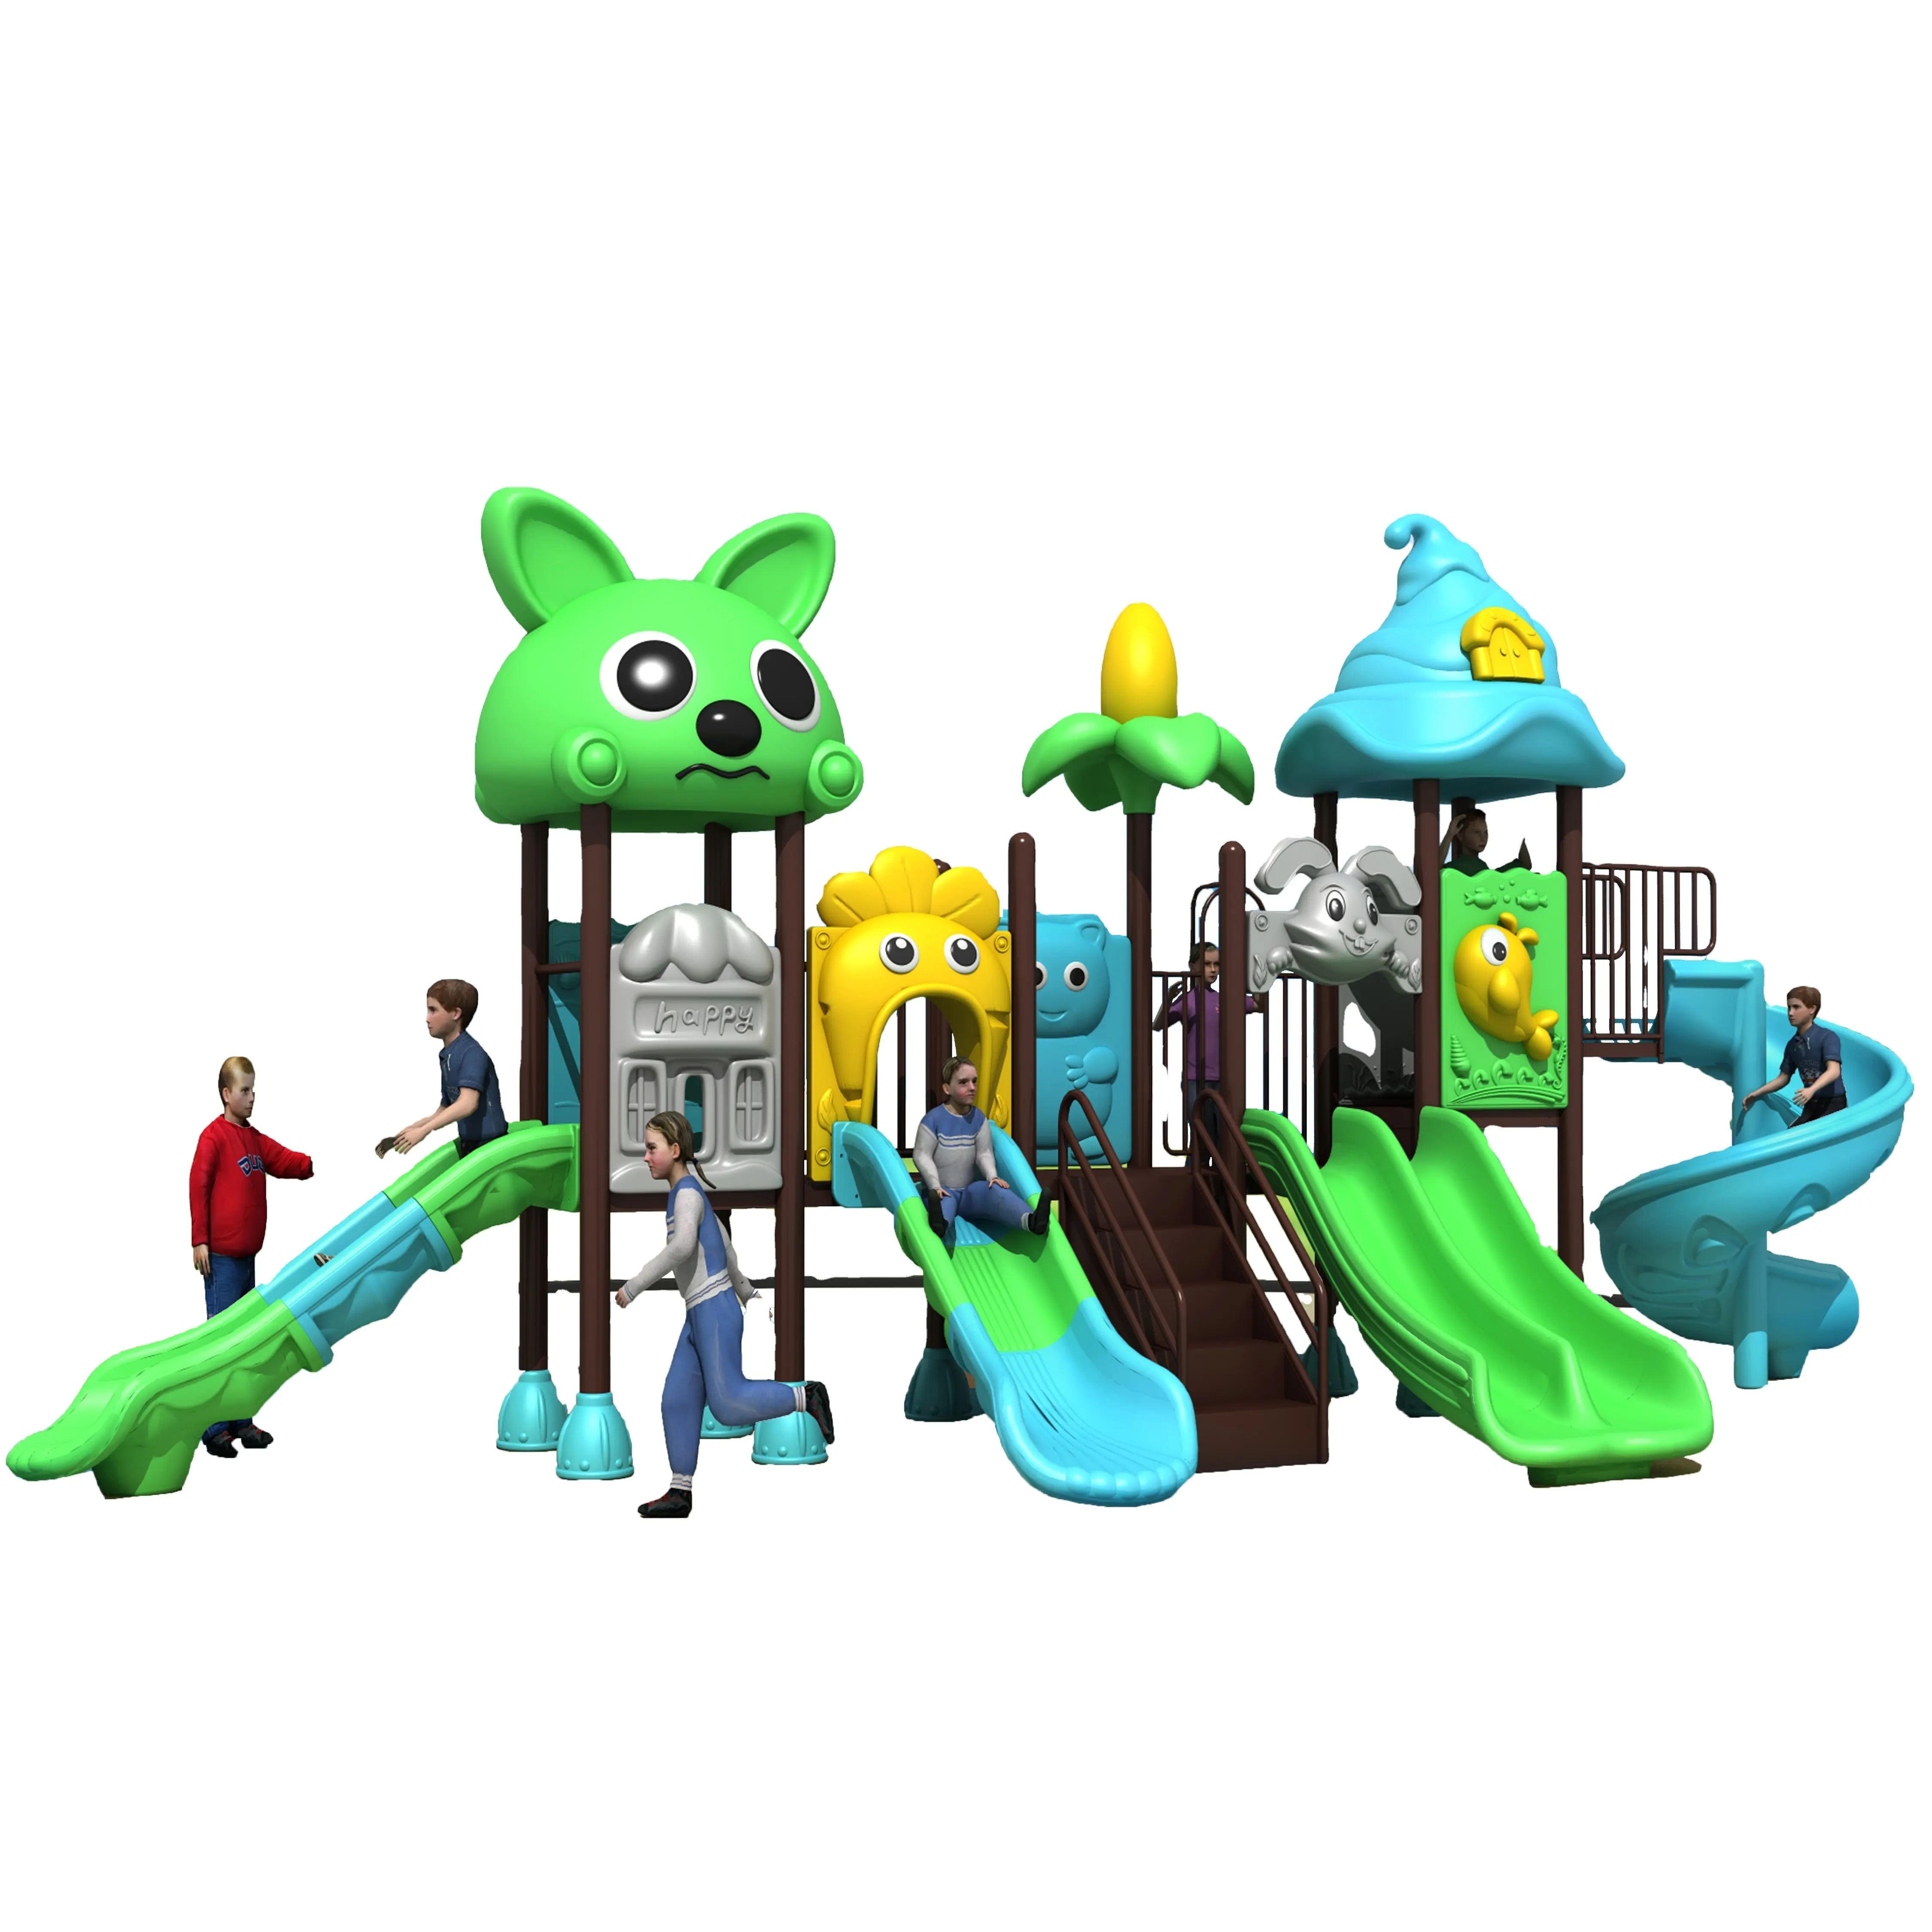 Children's plastic outdoor playground with slides and swings outdoor game